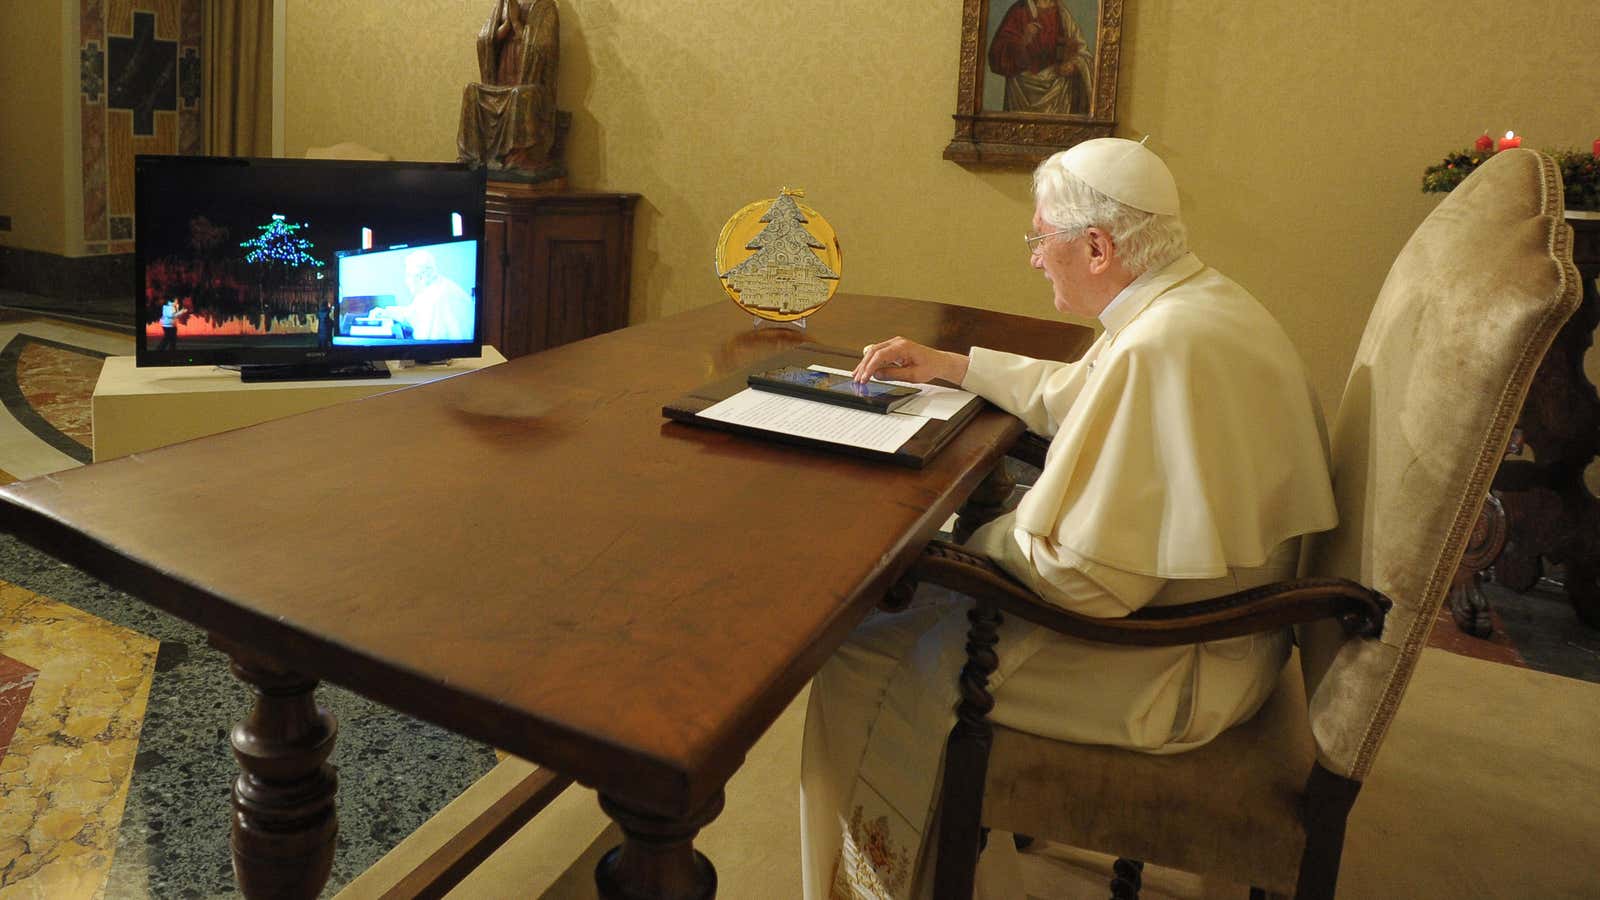 “The pope is not going to be walking around with a Blackberry or an iPad,” says his spokesman.